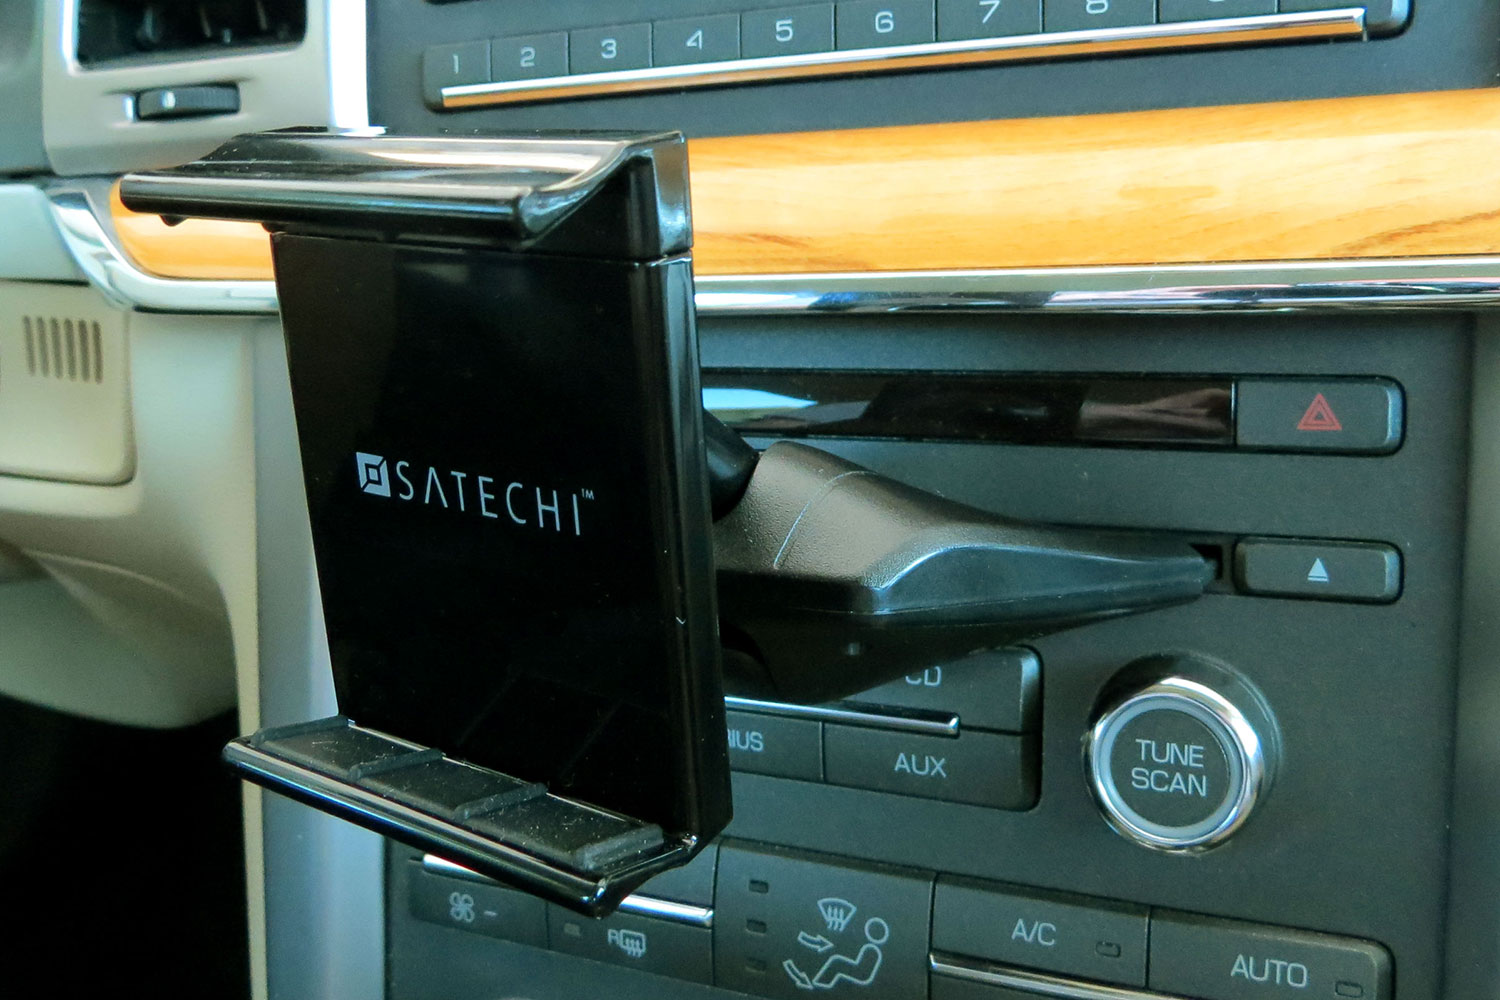 hands on satechi car mounts and accessories universal smartphone tablet cd slot dock 2